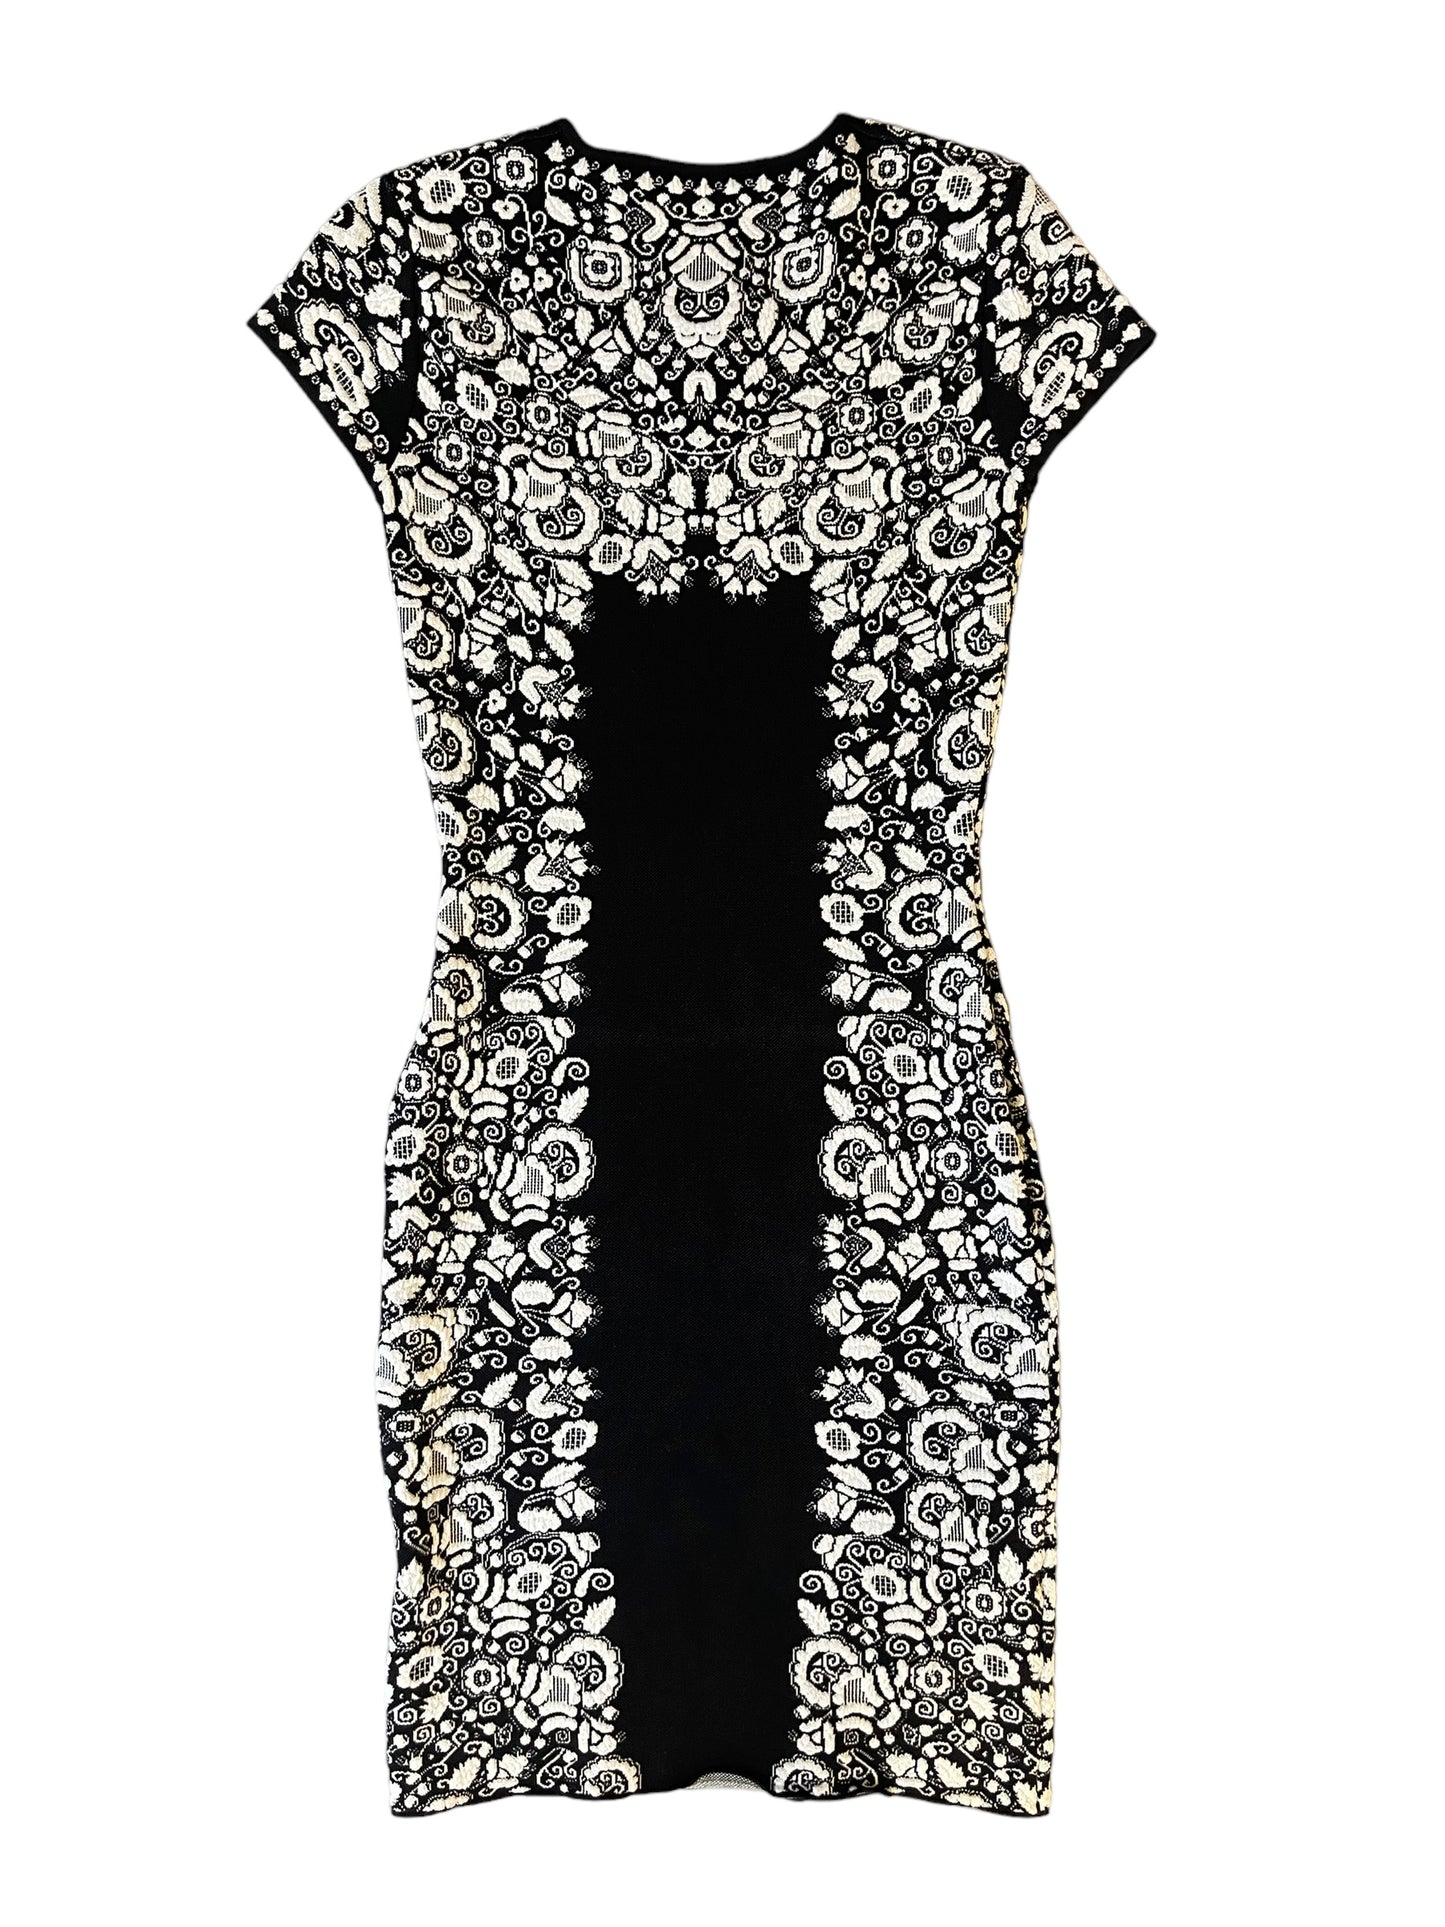 BCBG Maxazria Black And White Detail Dress For Any Occasion Size S